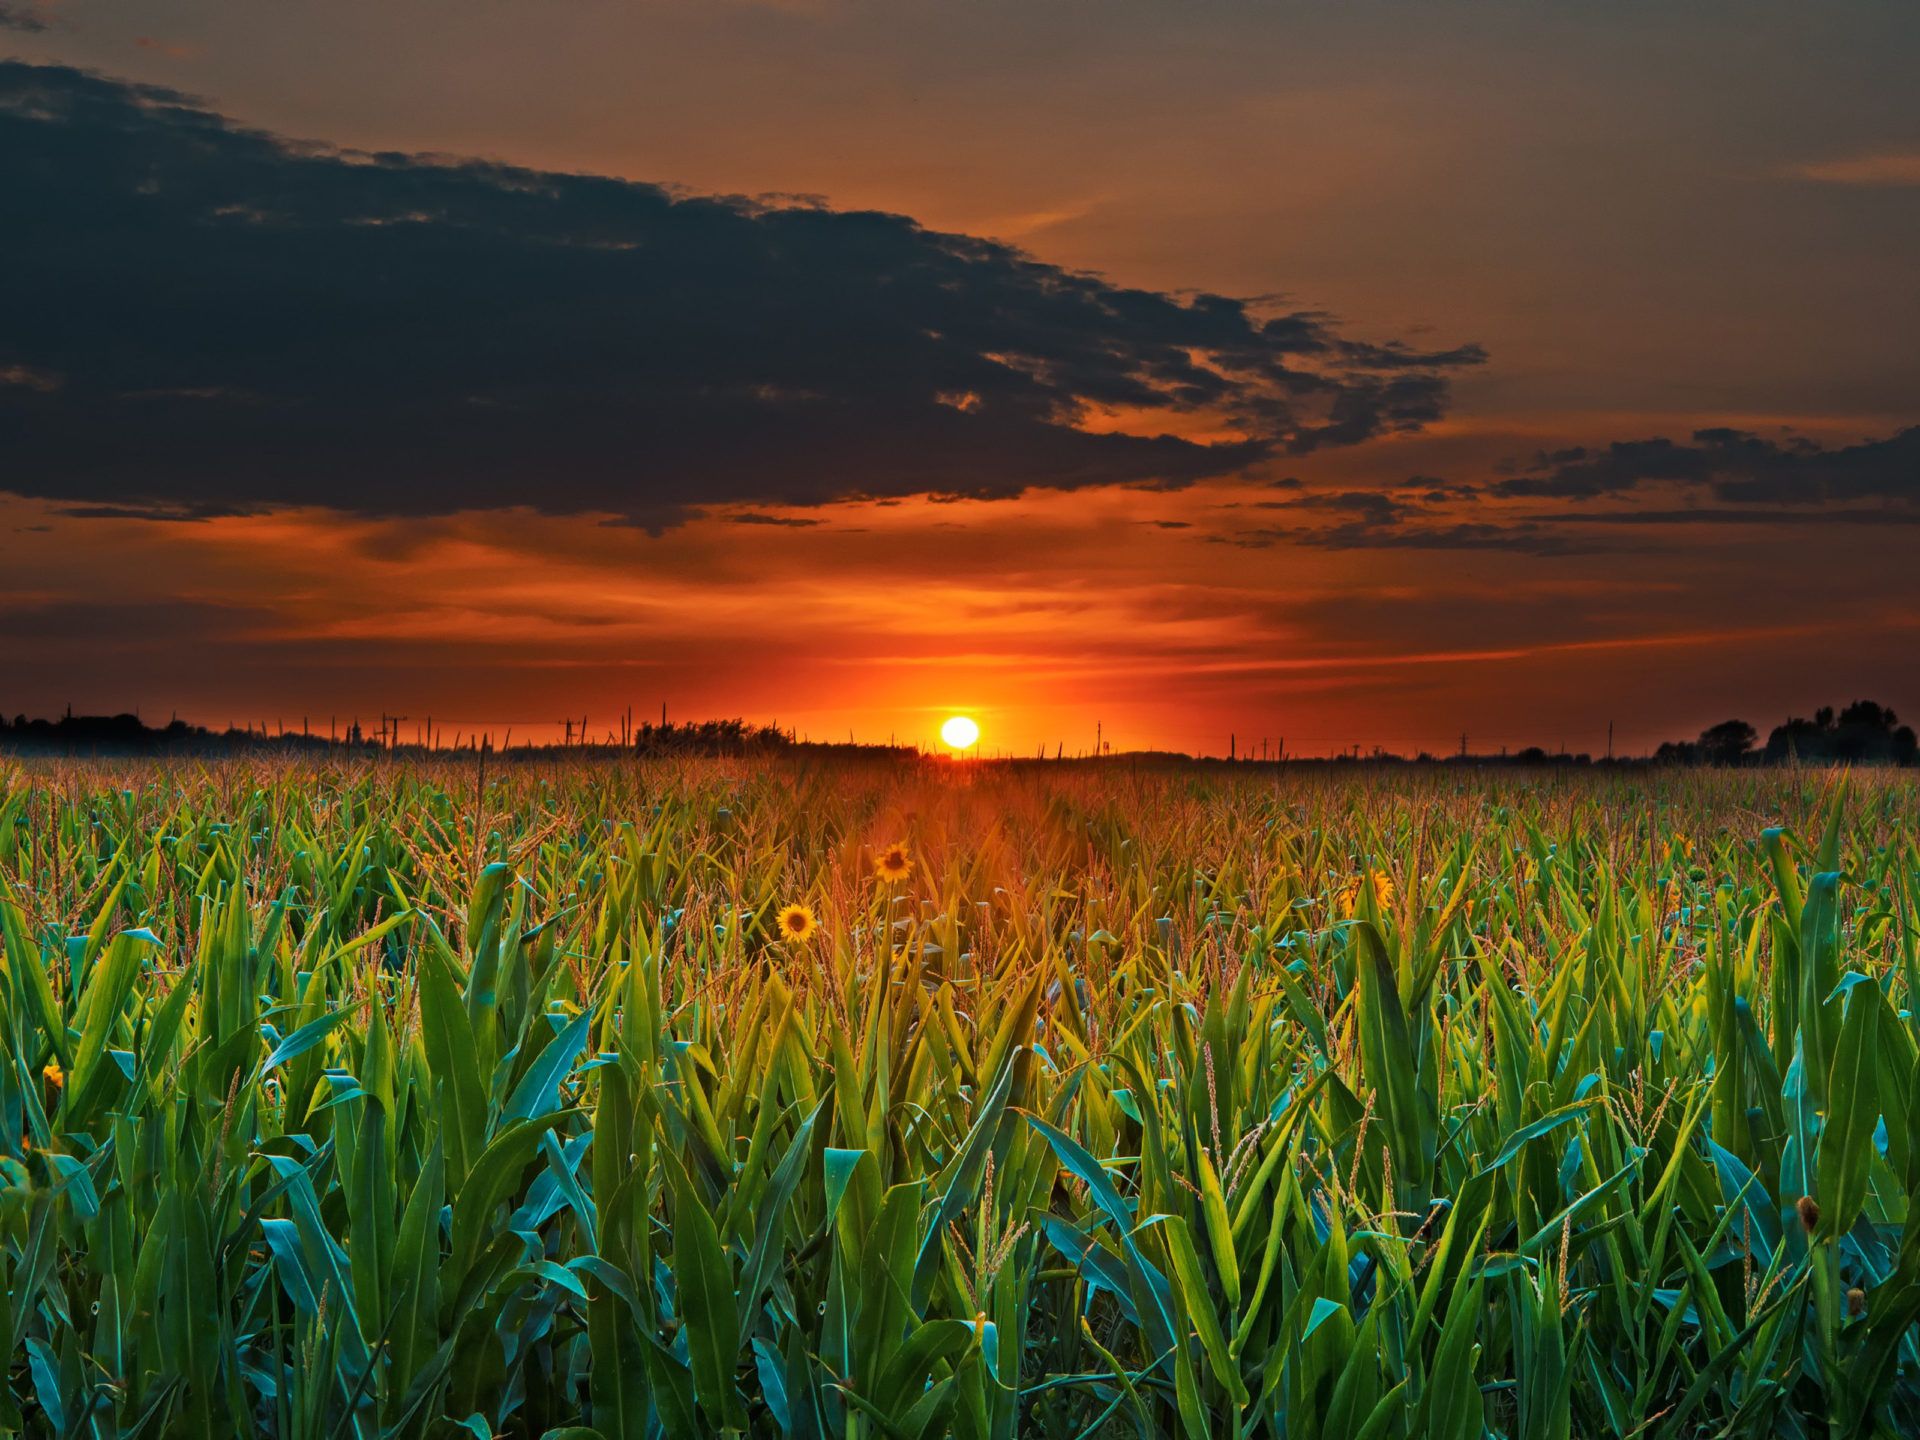 Sunset Green Field With Corn Dark Clouds 4k Ultra HD Desktop Wallpaper For Computers Laptop Tablet And Mobile Phones 3840x2400, Wallpaper13.com